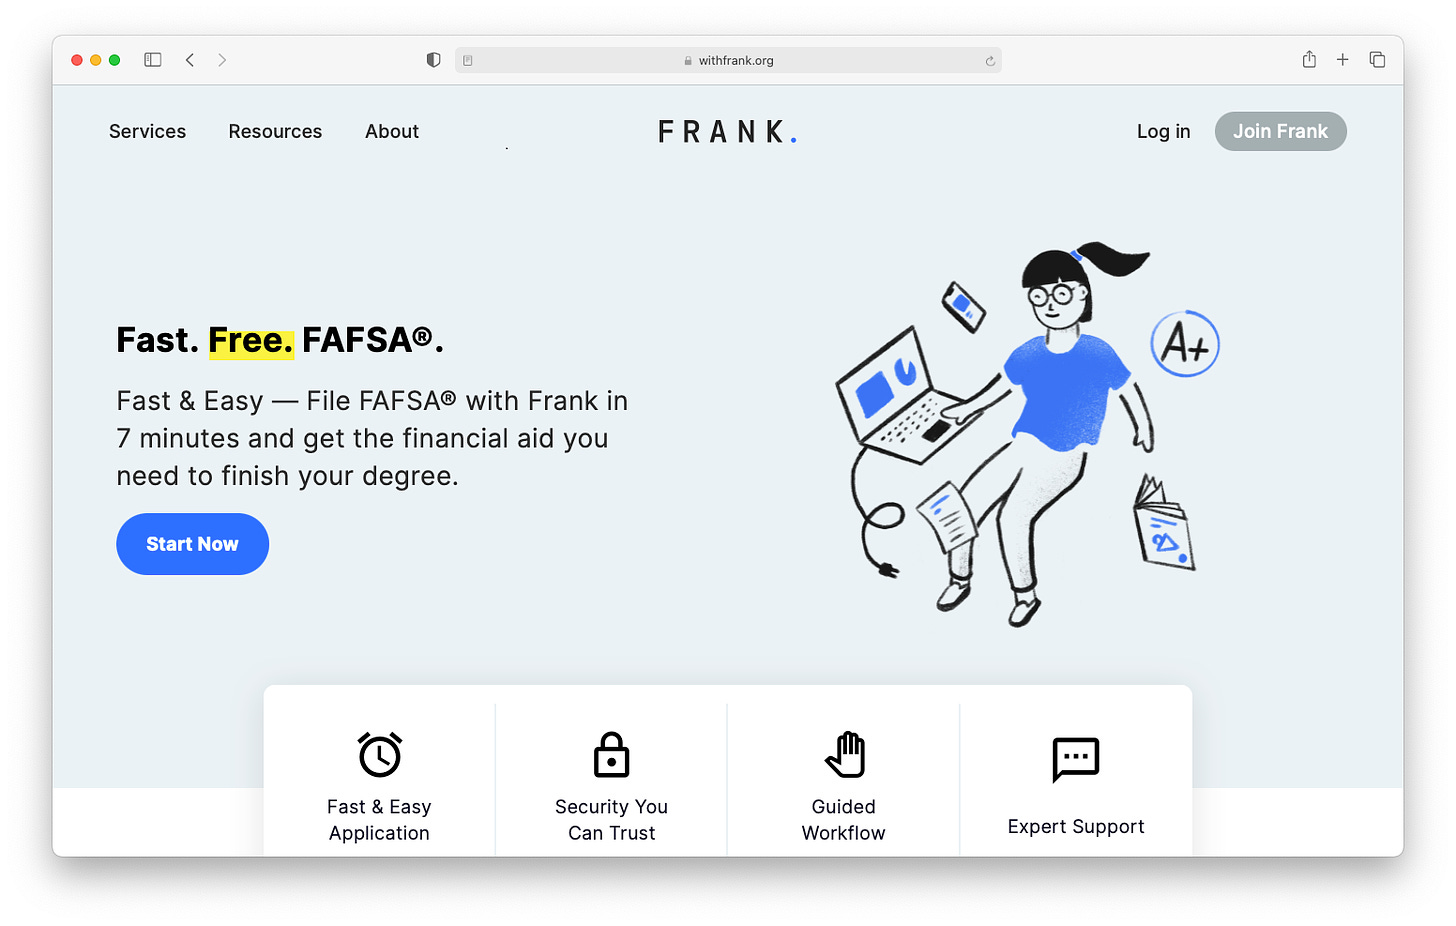 JP Morgan Chase Acquires Frank